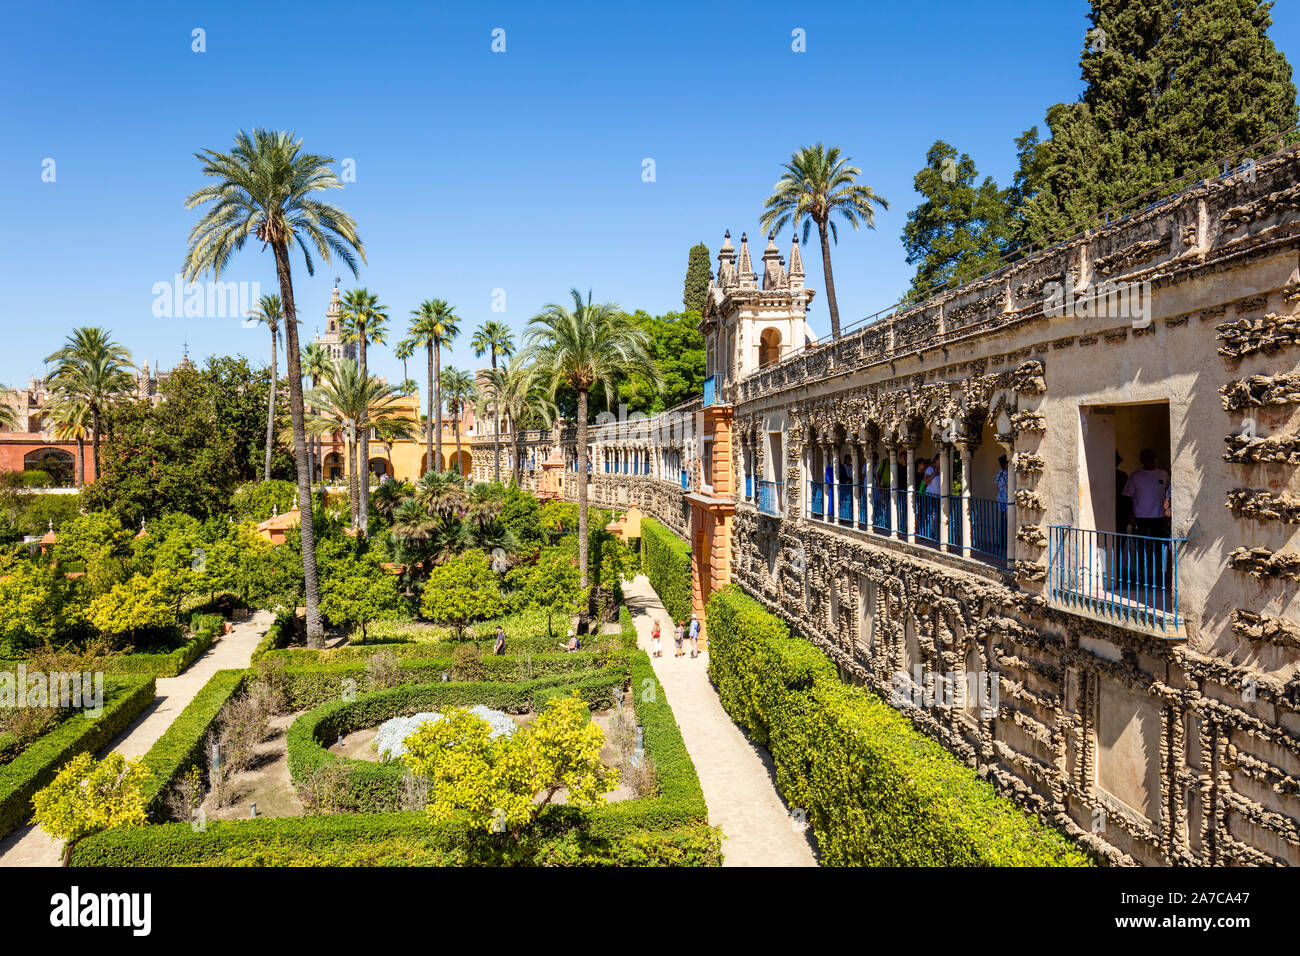 Galería de Grutesco and the Portal of the Privilege in the Gardens of the Real Alcazar palace Seville Spain Seville Andalusia Spain EU Europe Stock Photo